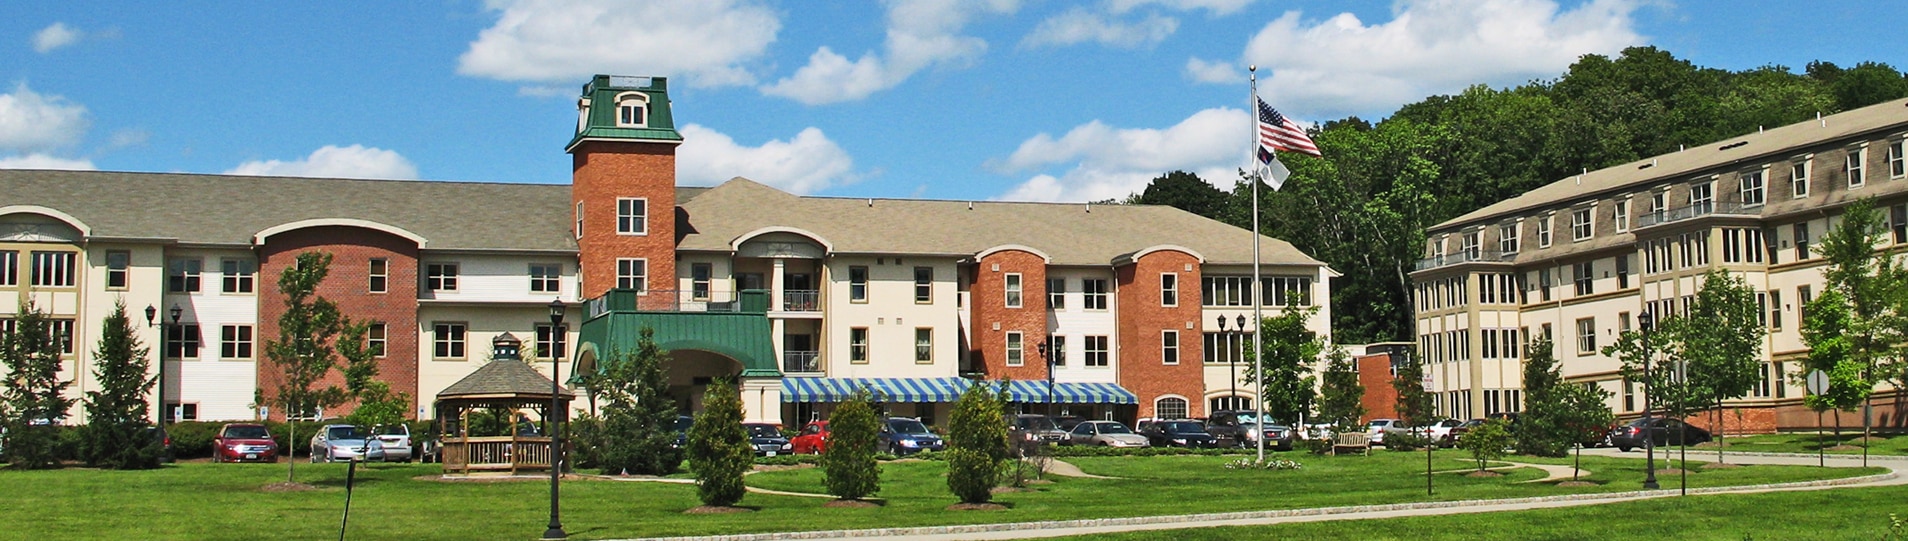 Assisted Living Costs At Bristol Glen of Newton NJ